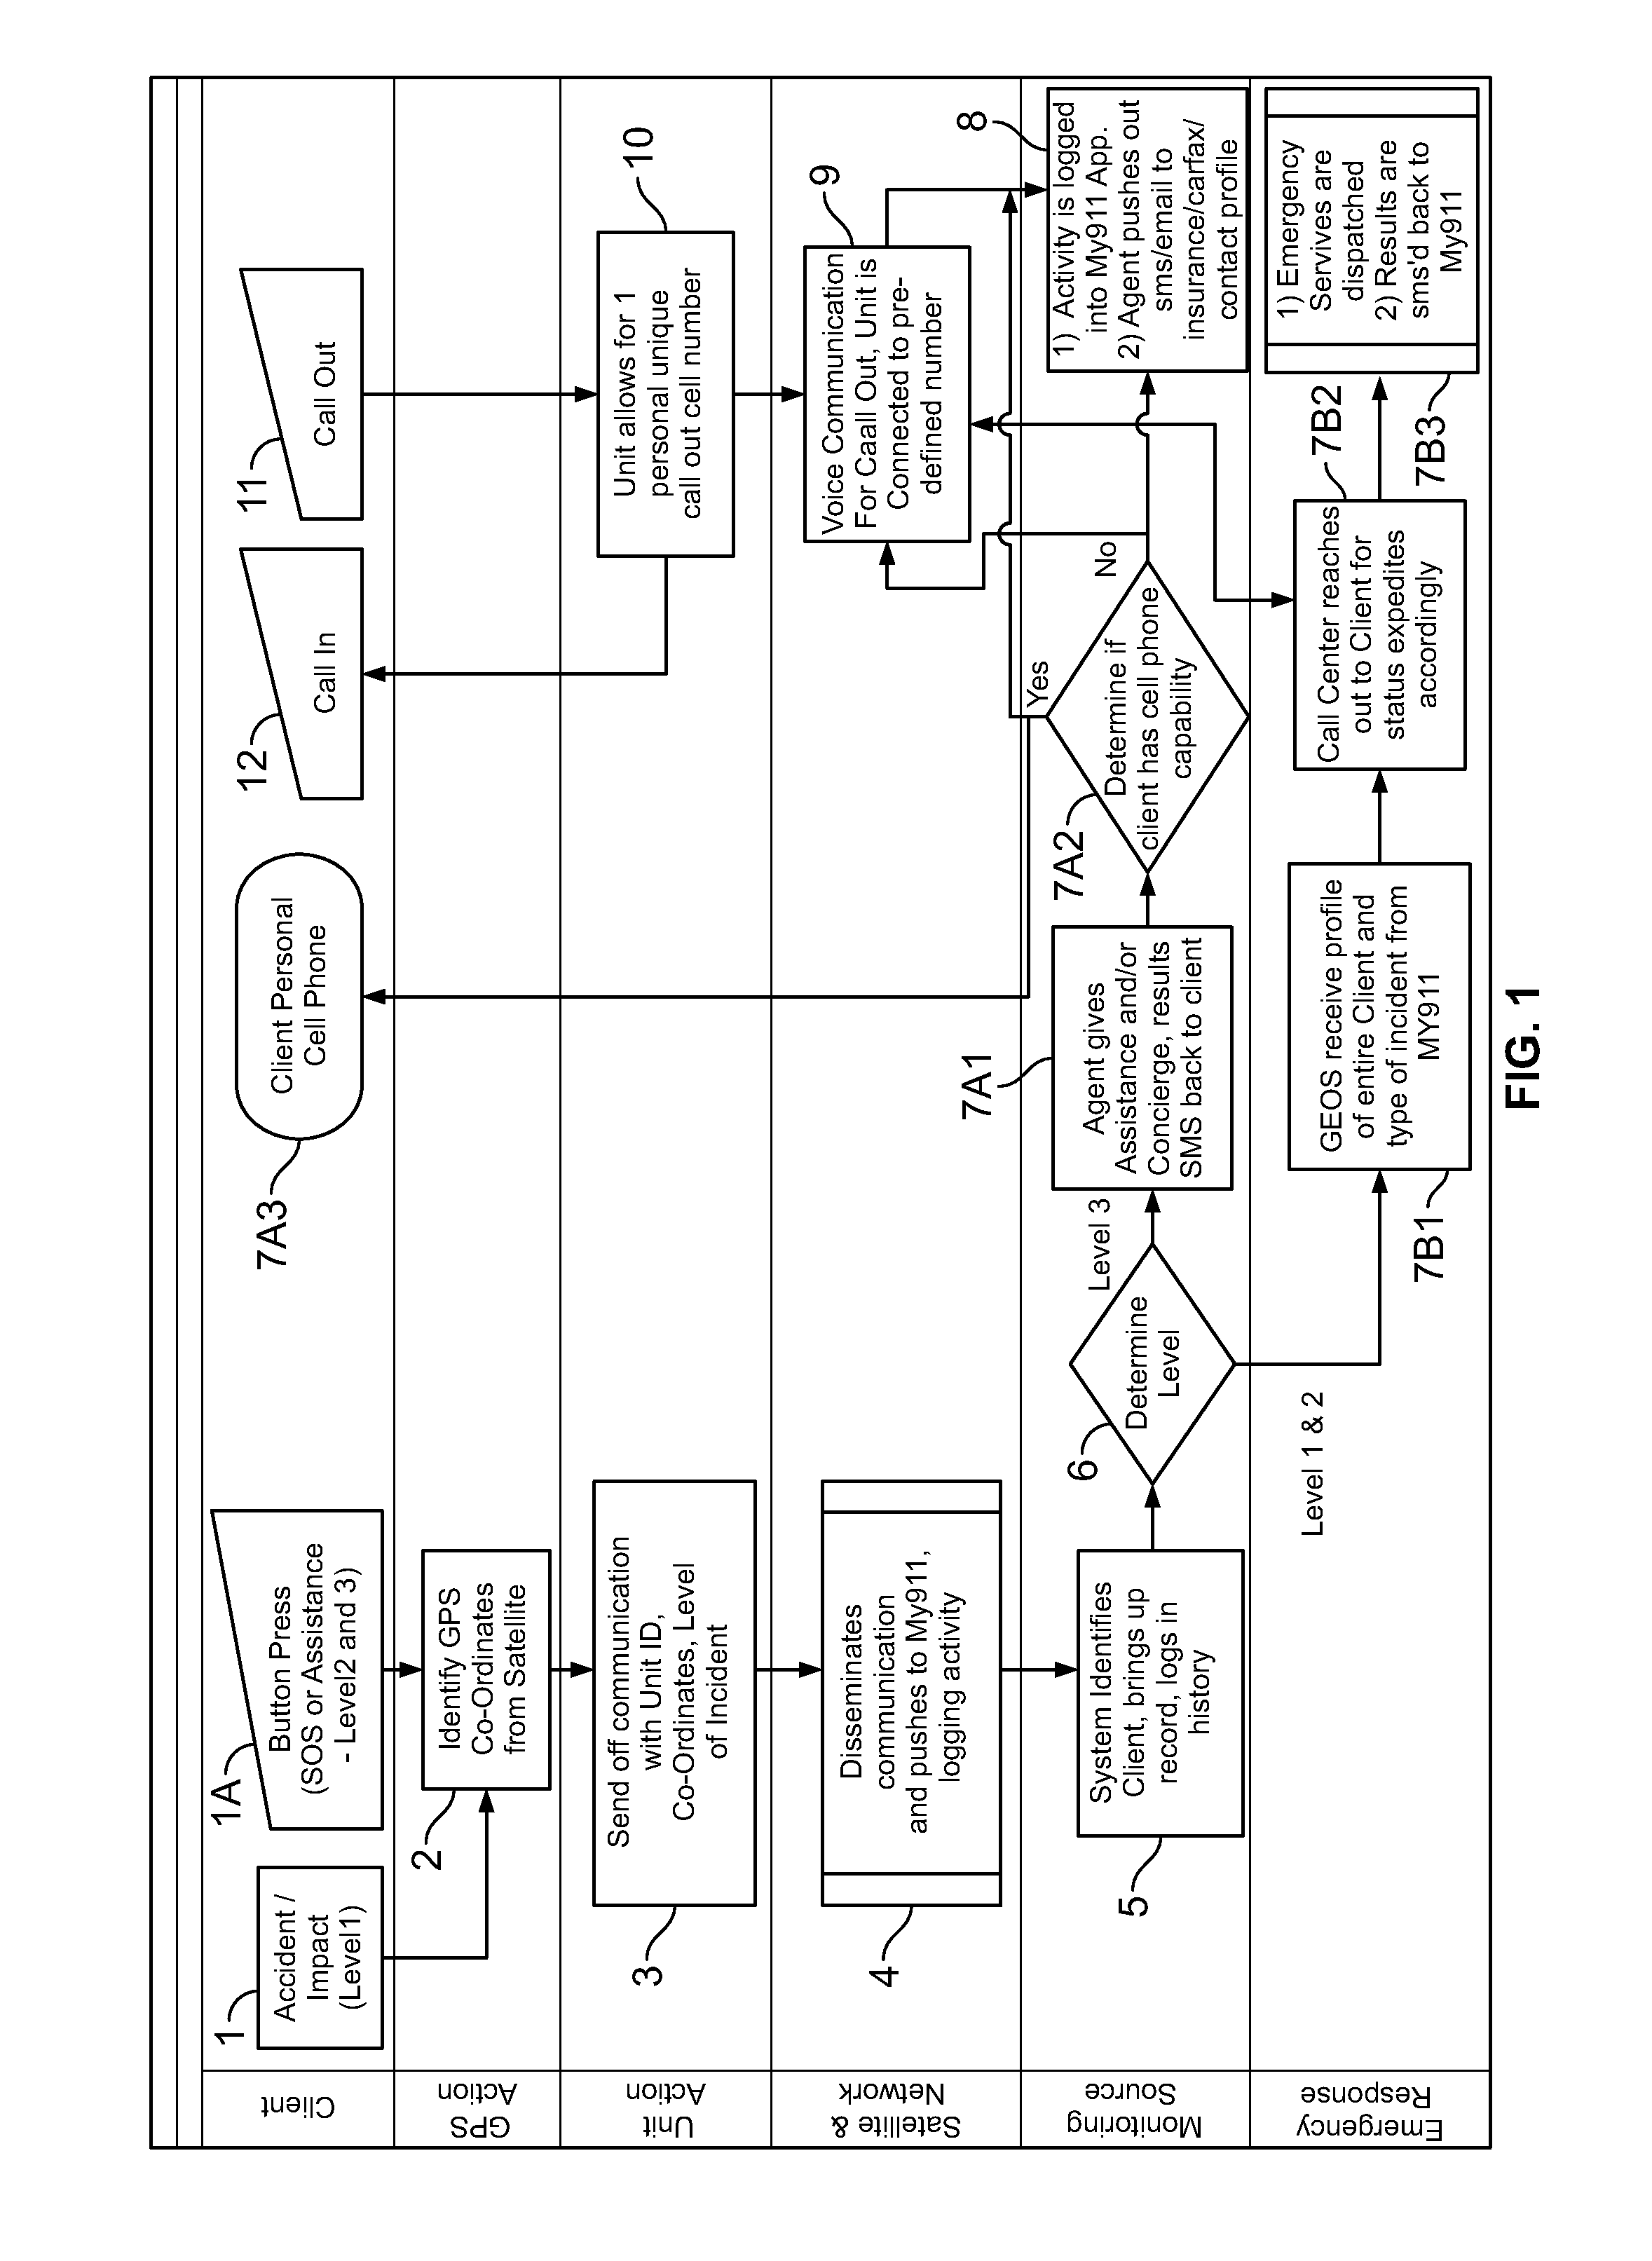 Apparatus and method for generating alerts